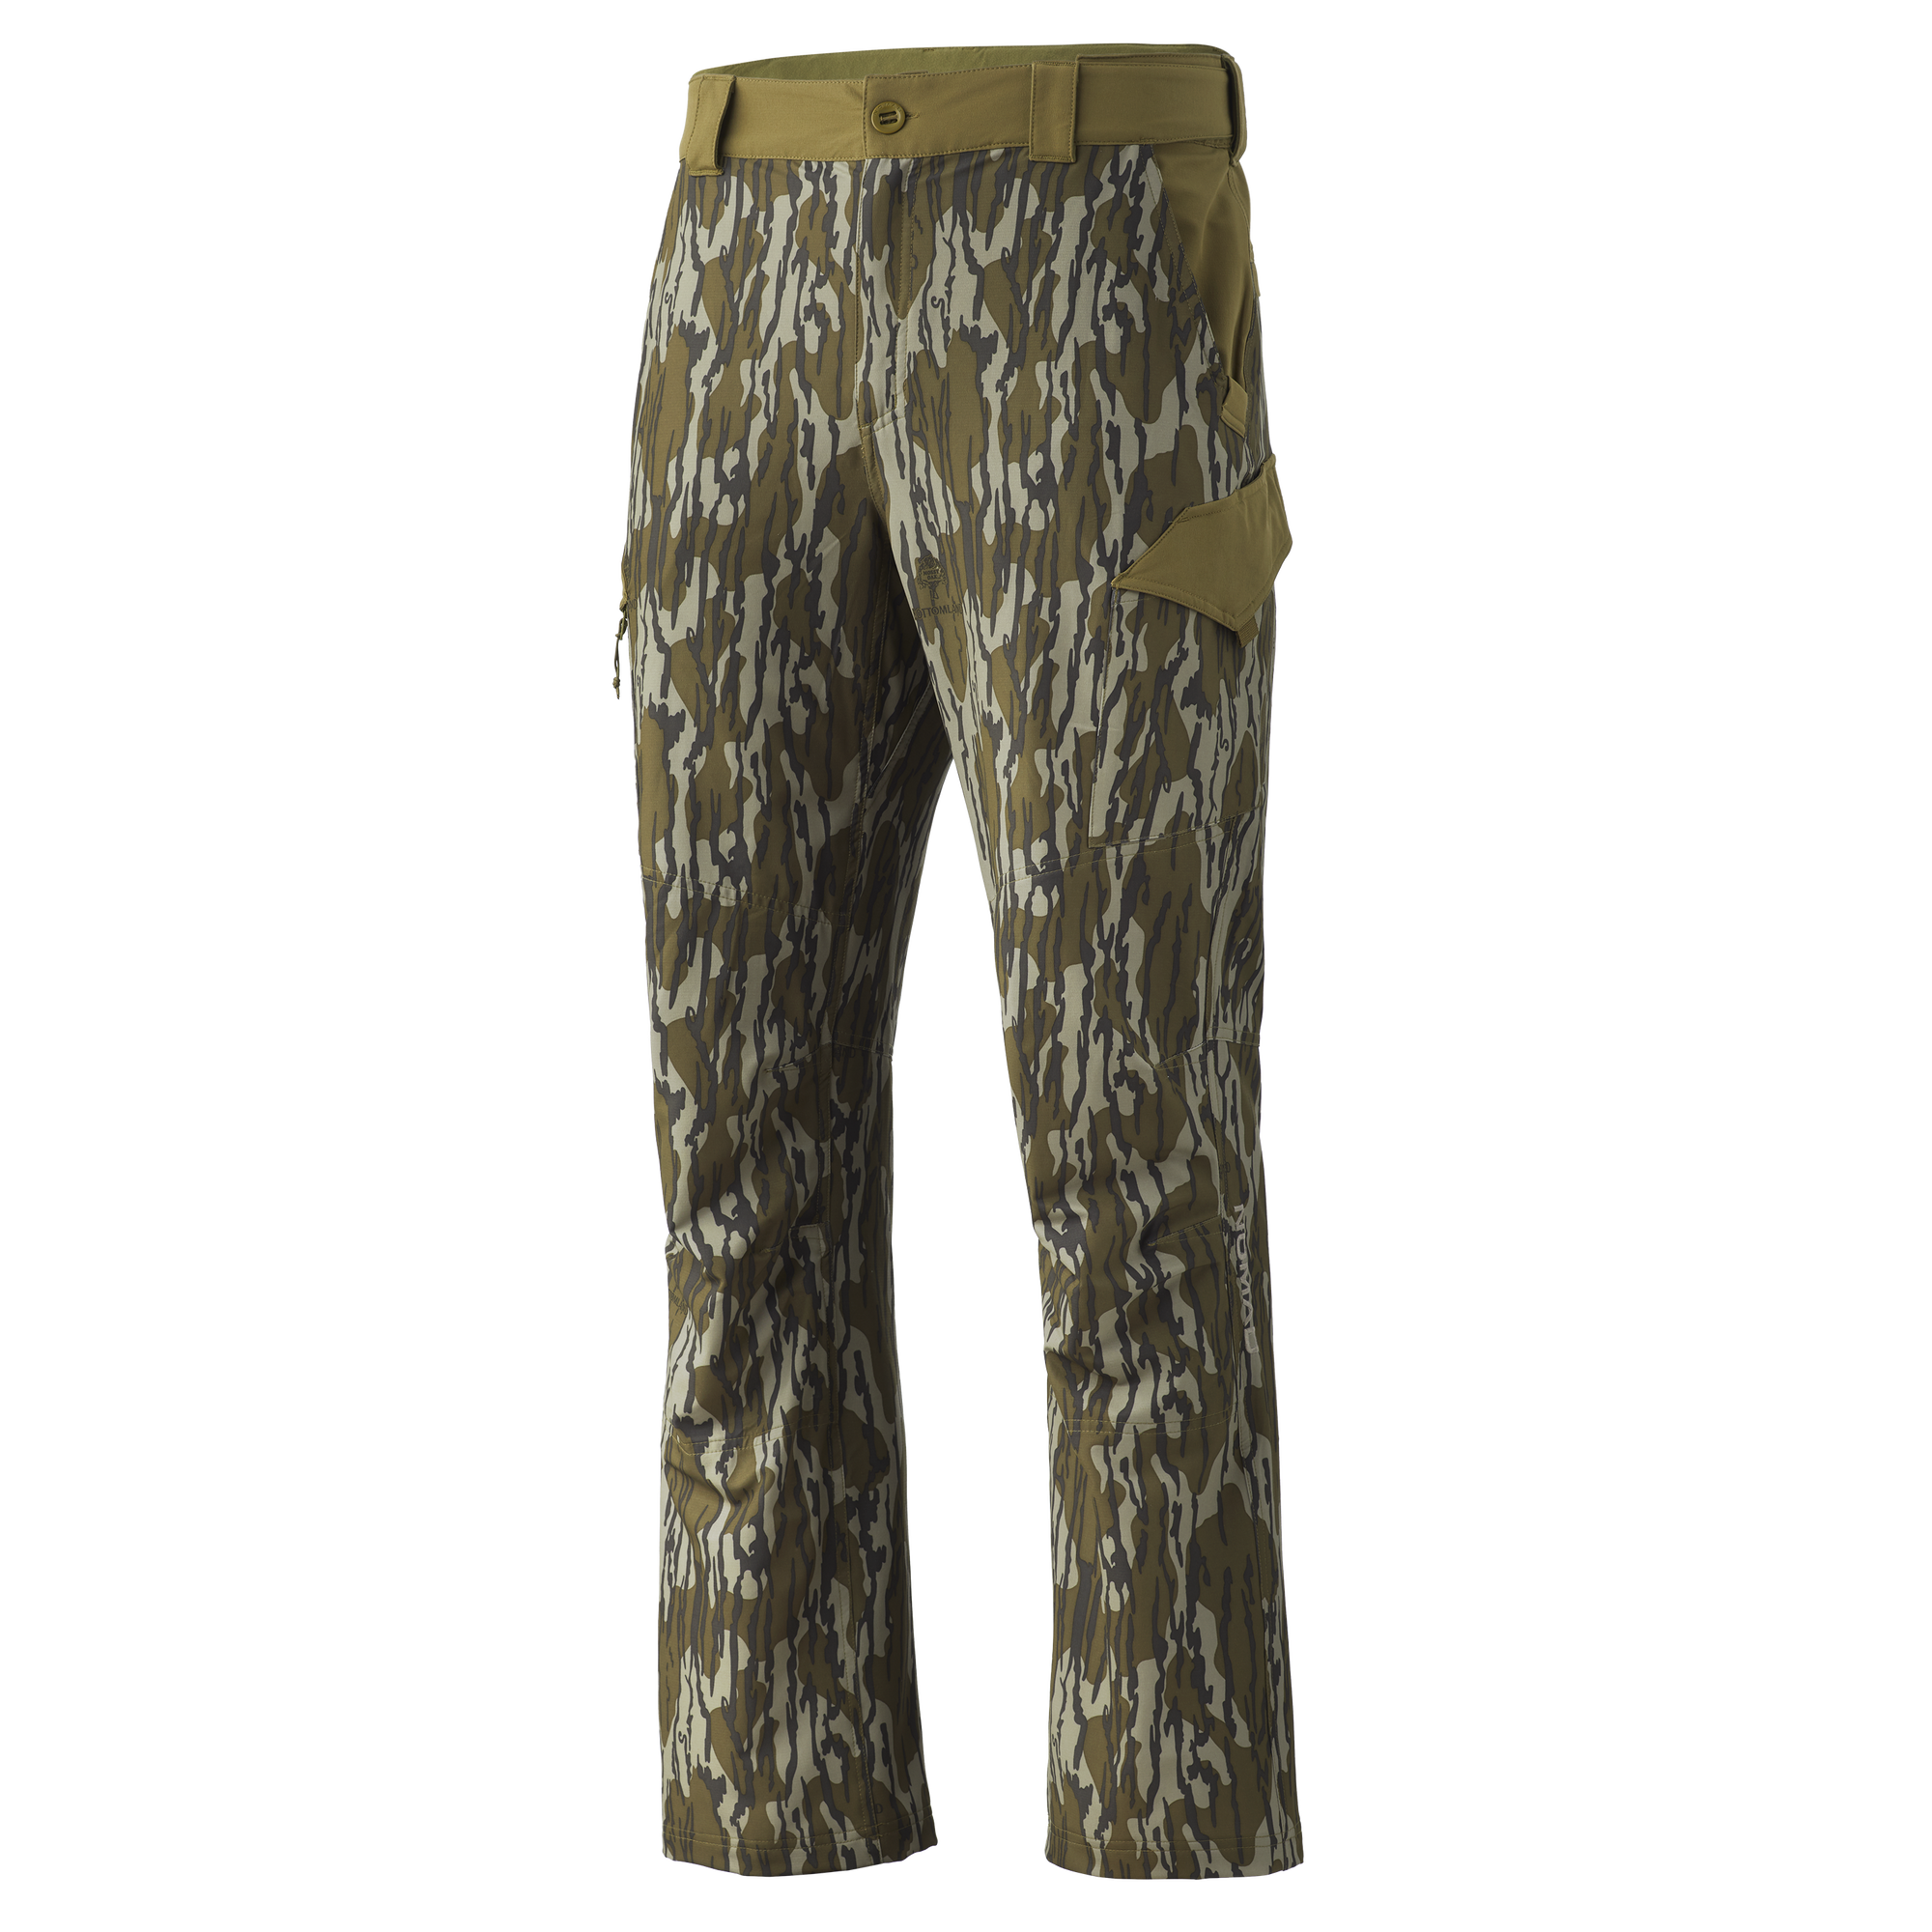  Nomad Pursuit Pant  Hunting/Outdoors Pants W/Adjustable  Waistband : Clothing, Shoes & Jewelry